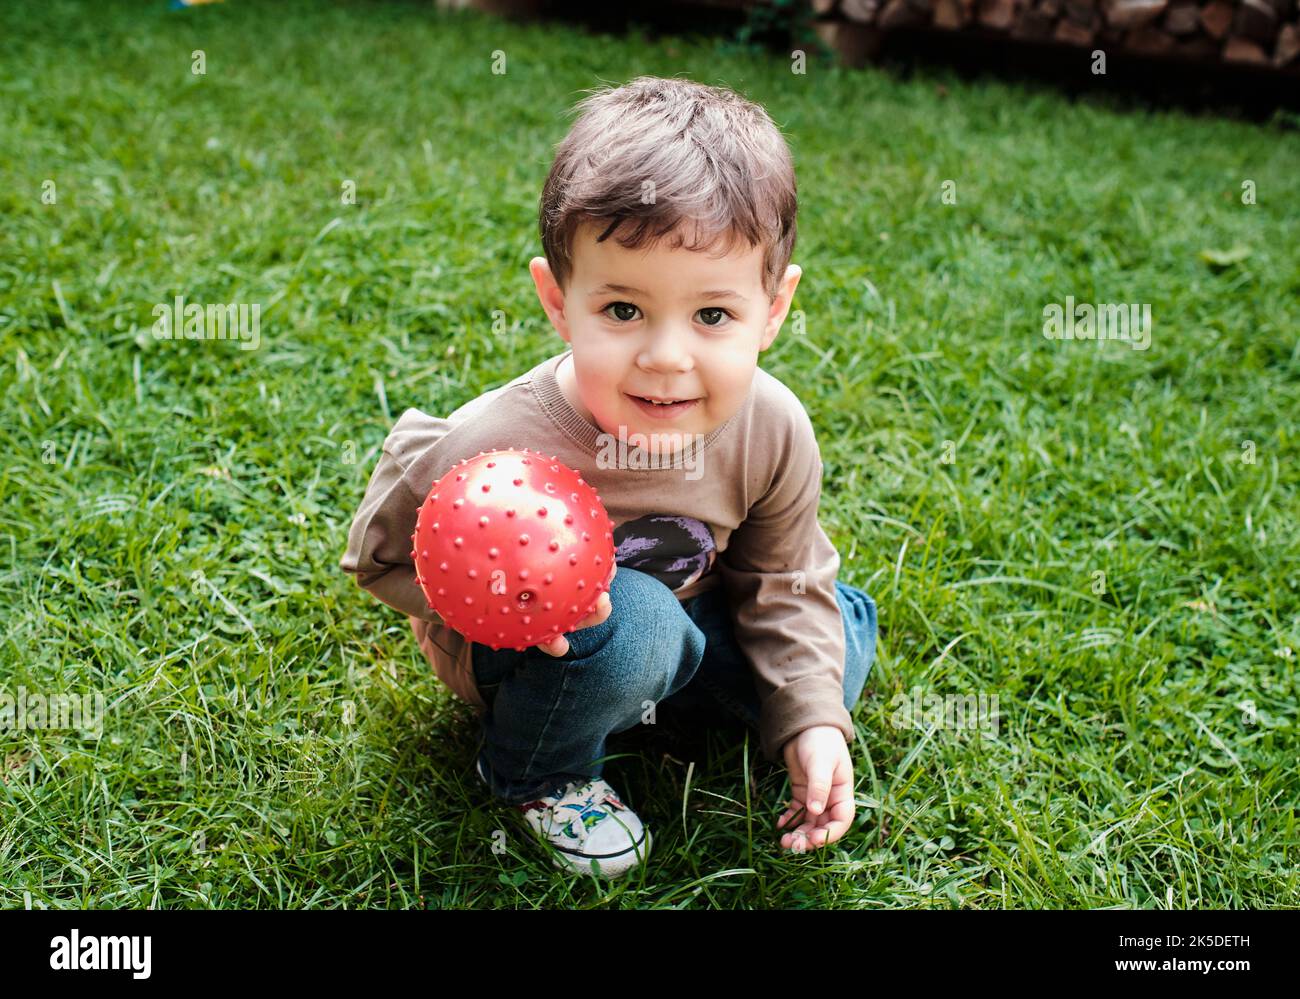 super cute young boy is Playing with a ball on the grass in the backyard Stock Photo